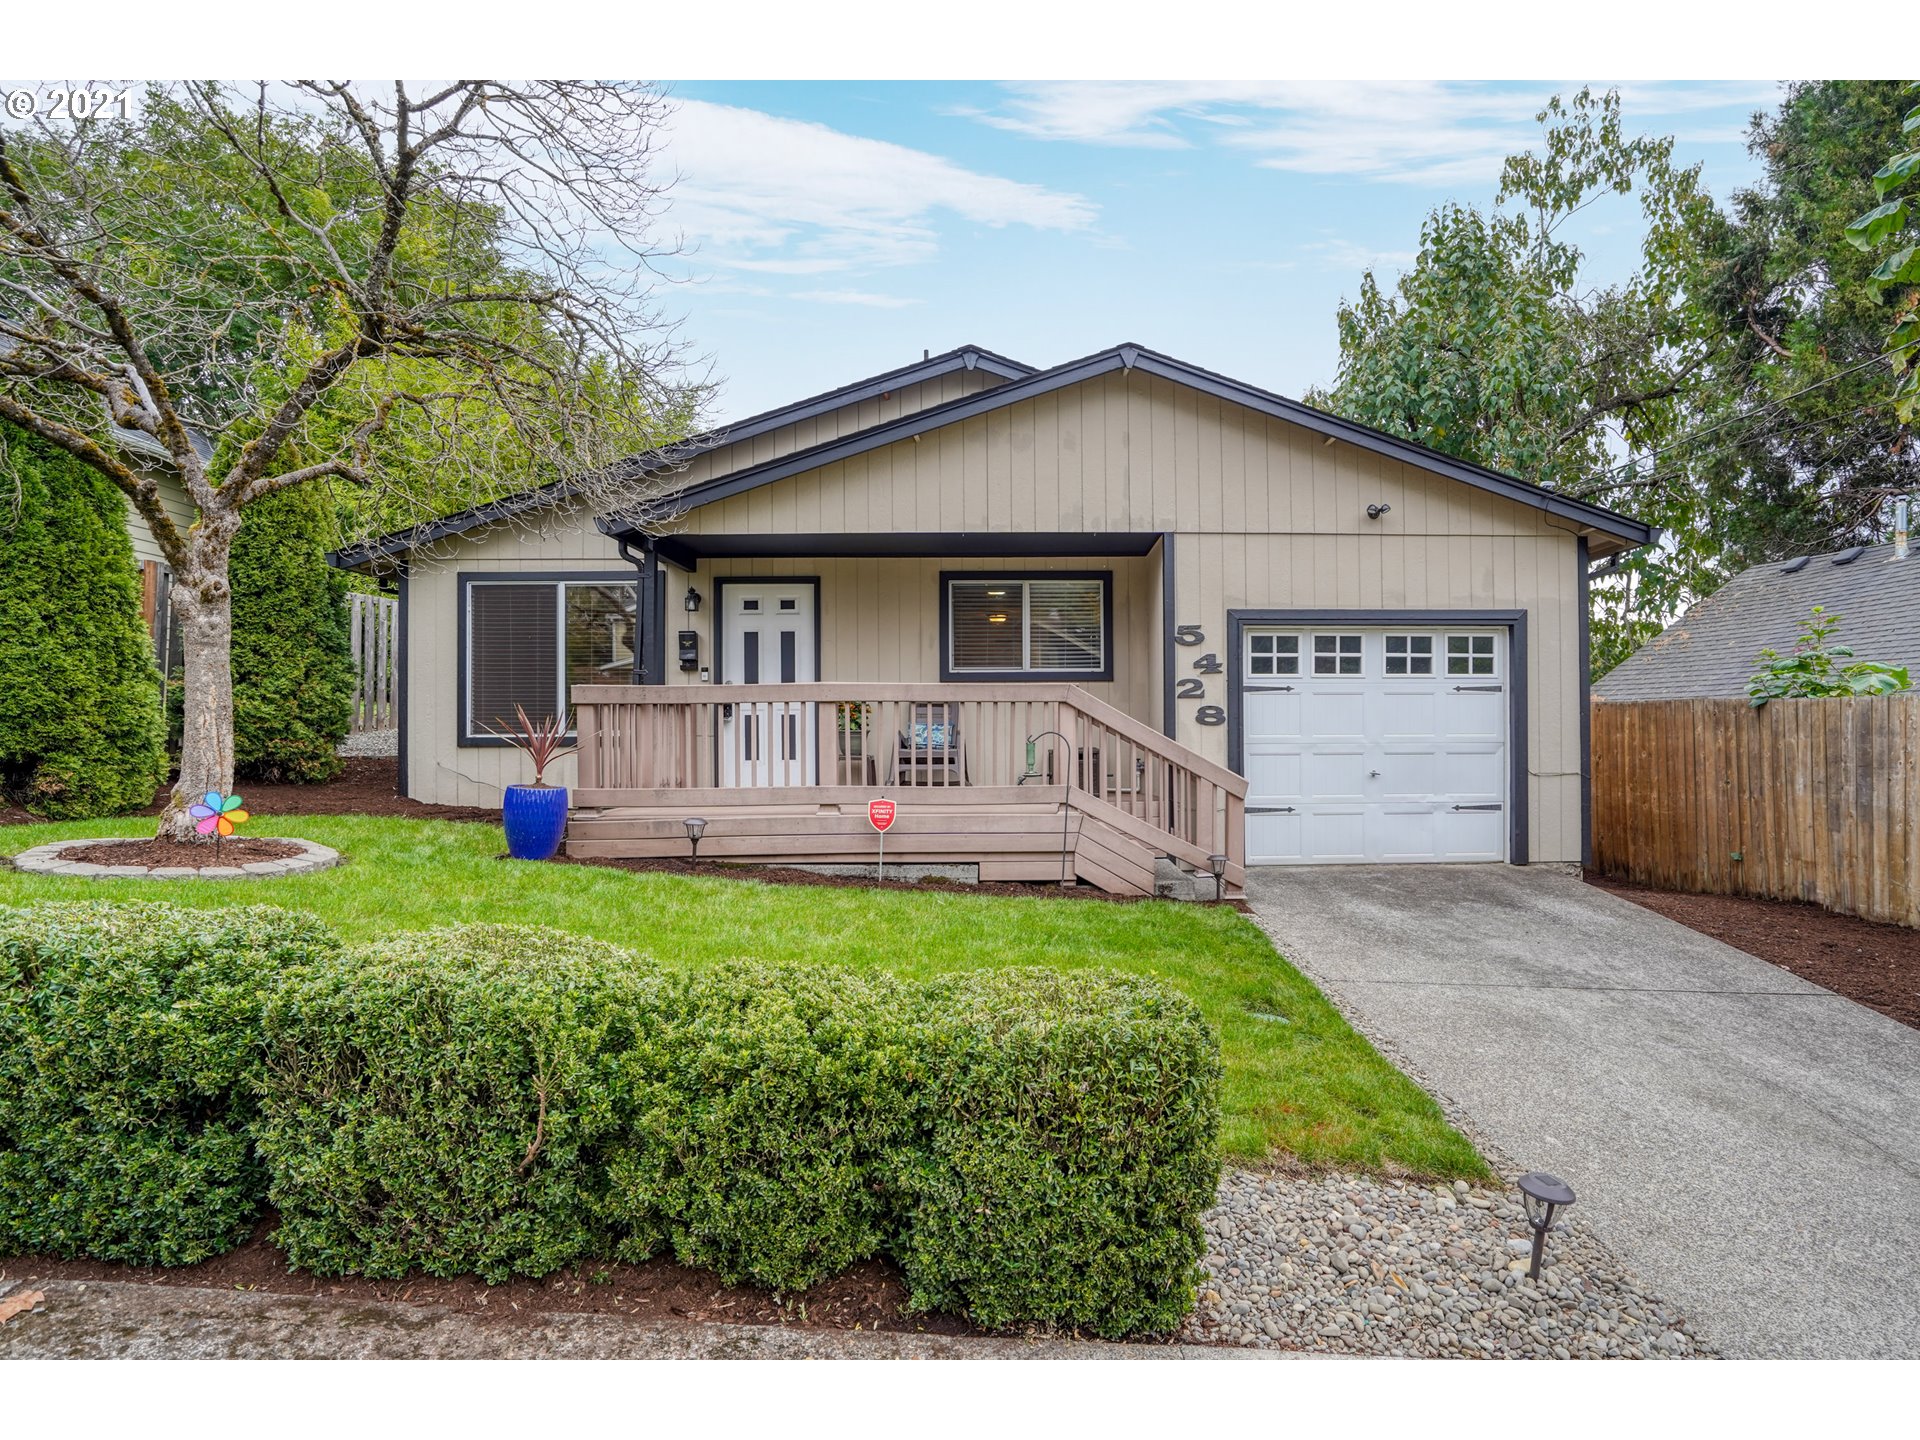 5428 SE 100TH AVE (1 of 22)